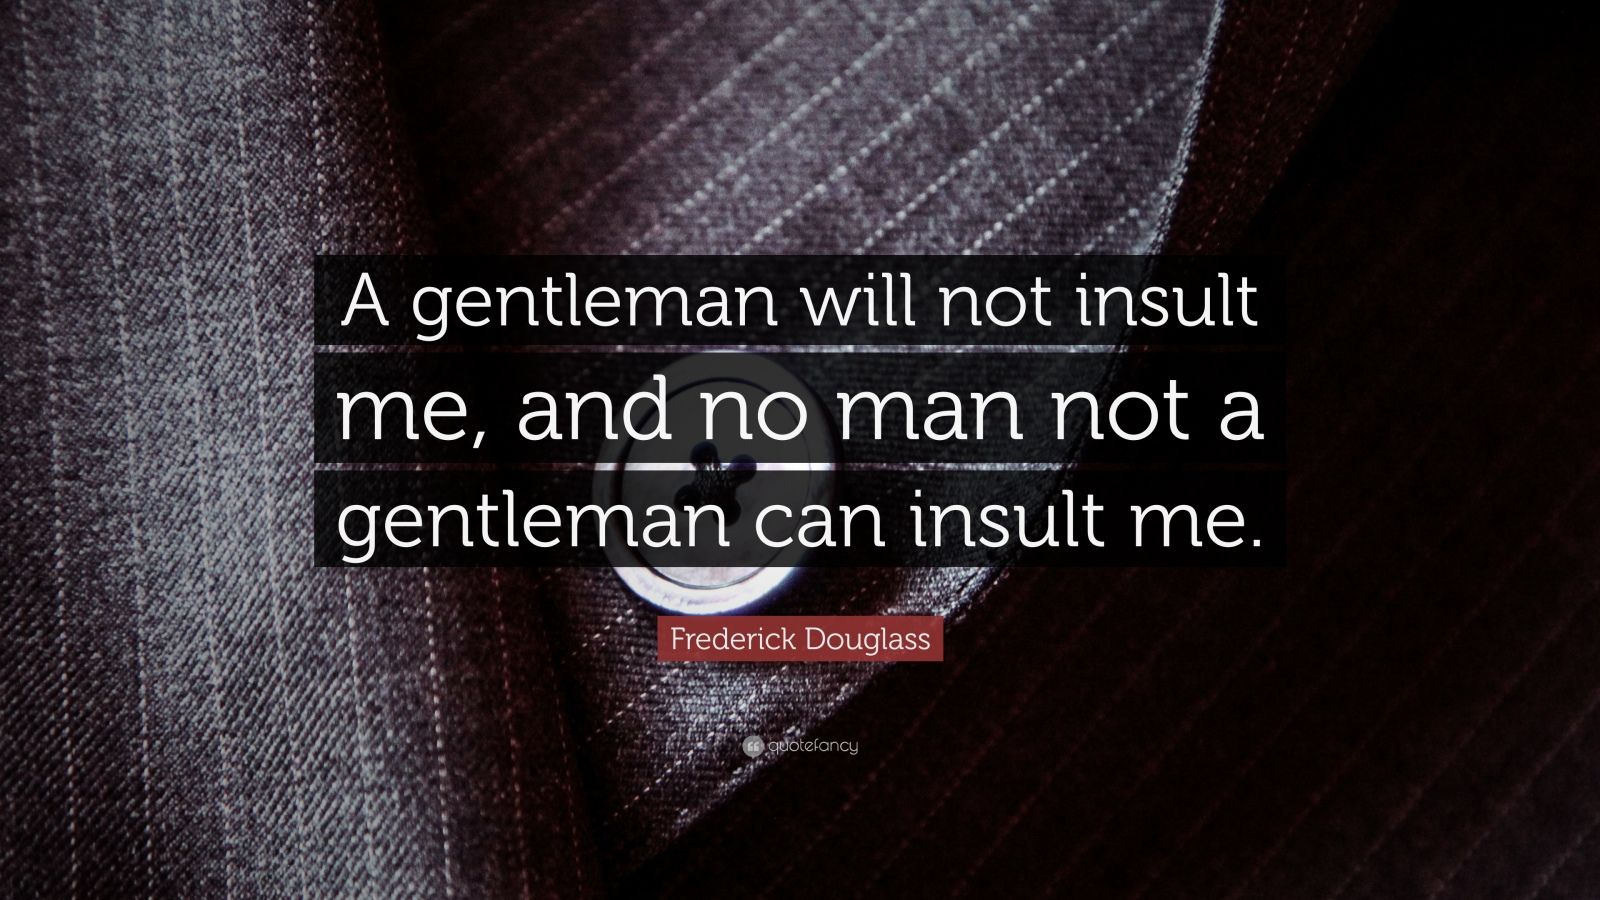 Frederick Douglass Quote: “A gentleman will not insult me, and no man not a gentleman can insult me.”